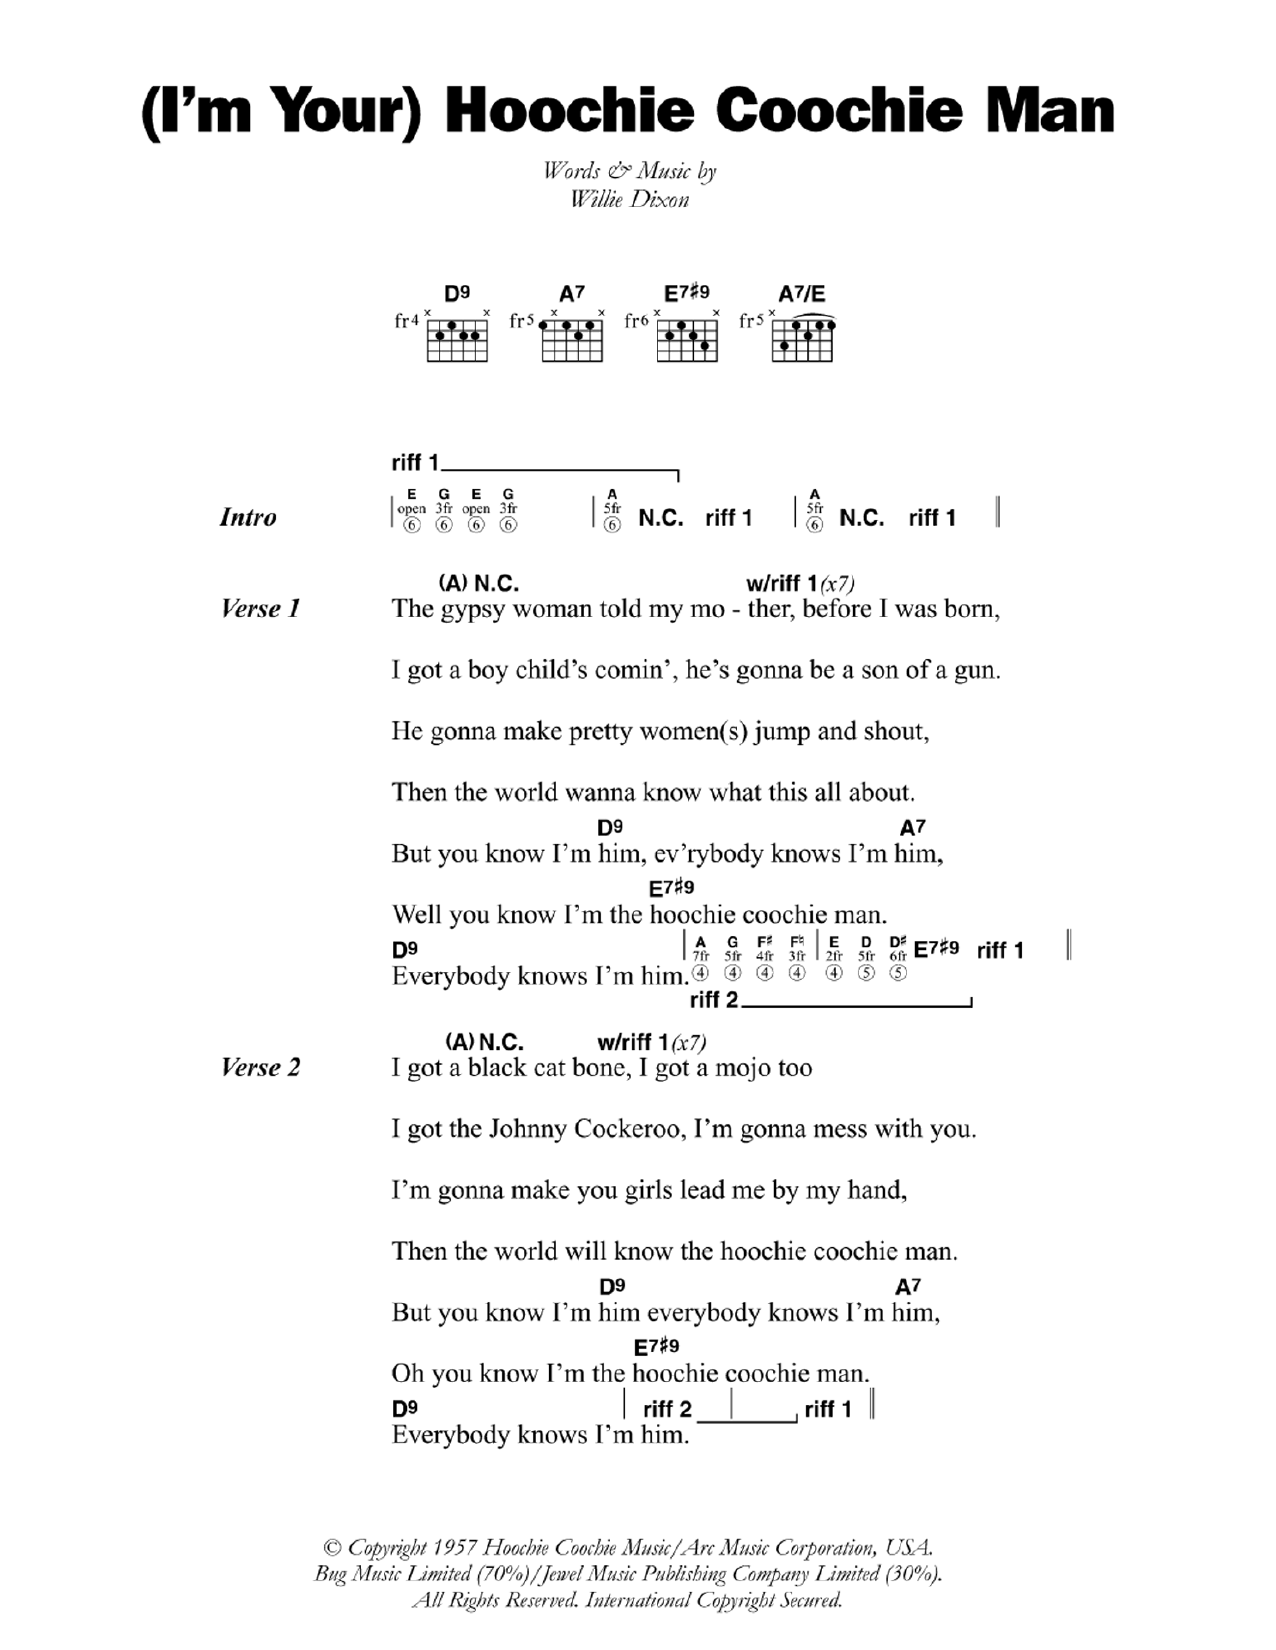 Download Muddy Waters (I'm Your) Hoochie Coochie Man Sheet Music